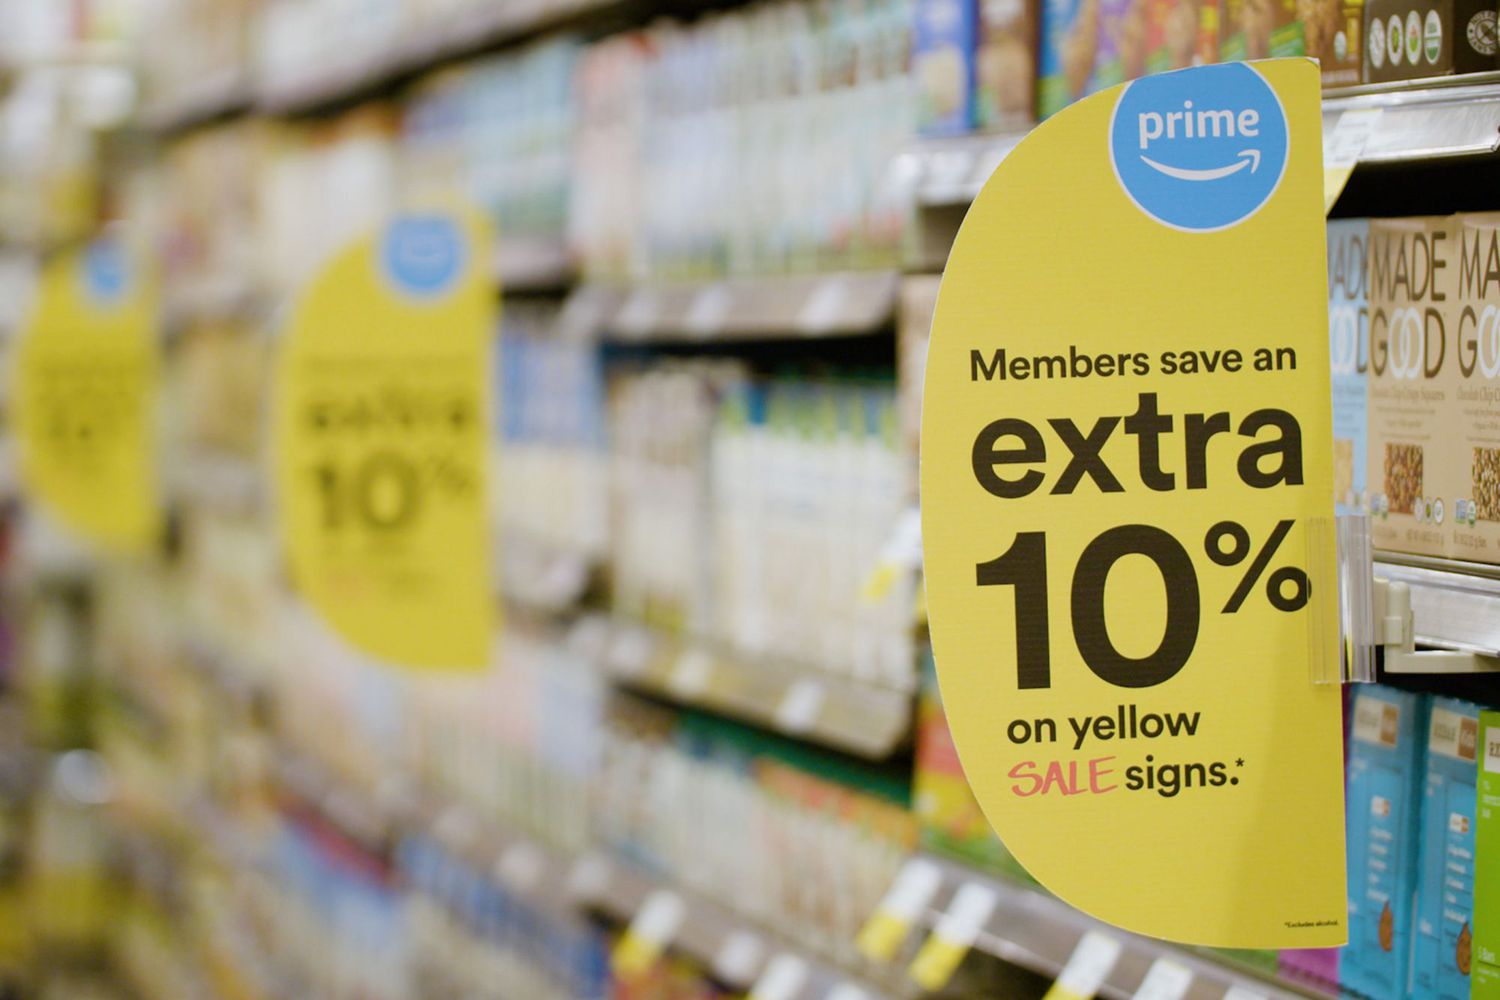 how-to-get-amazon-prime-discount-at-whole-foods